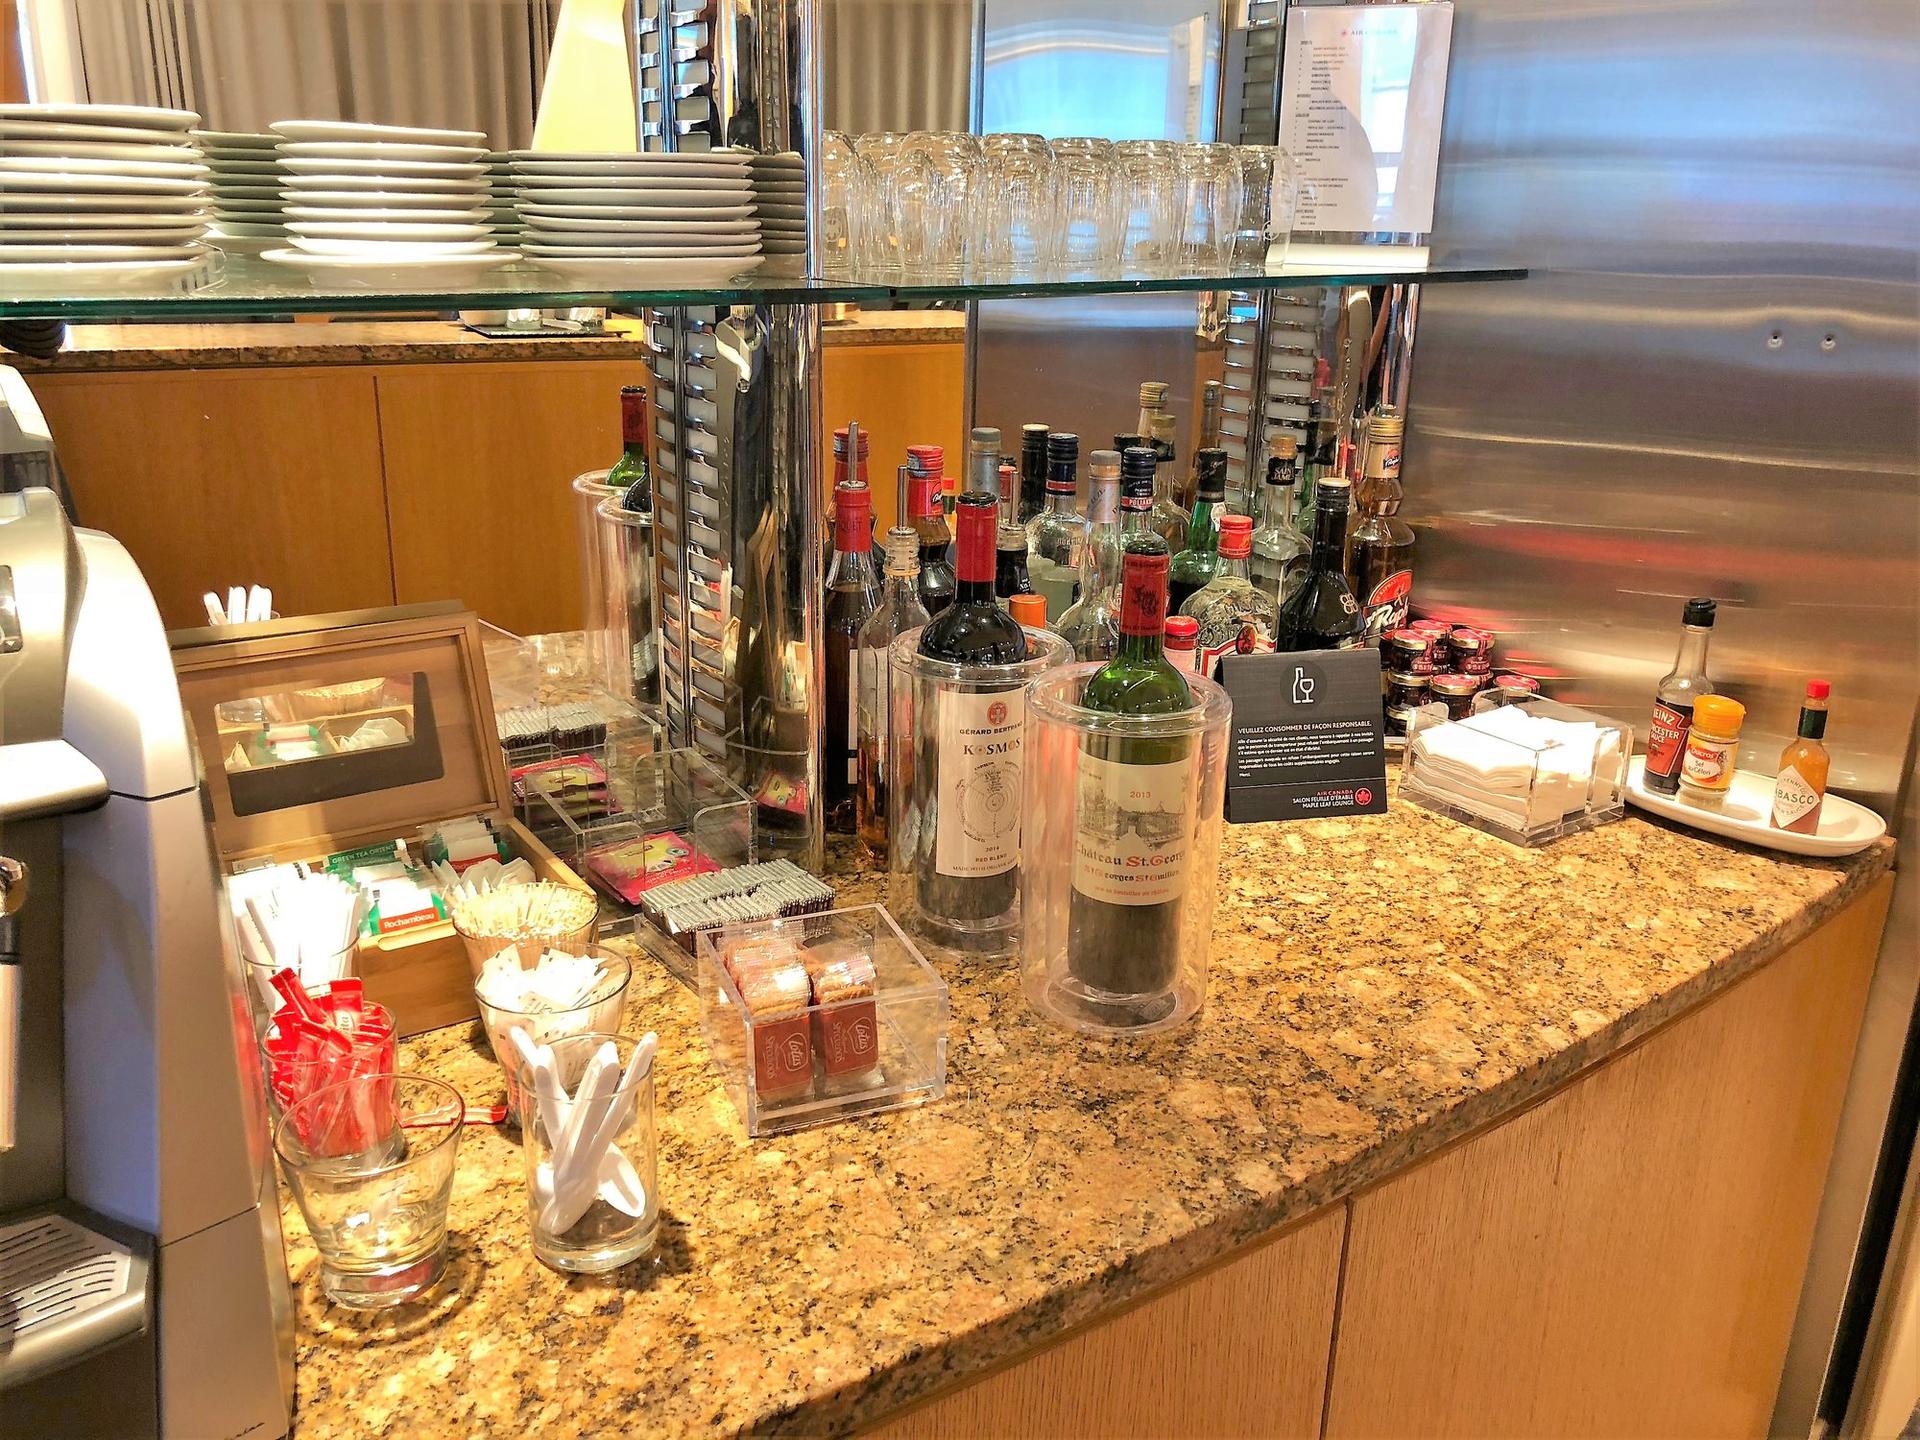 Air Canada Maple Leaf Lounge image 43 of 64